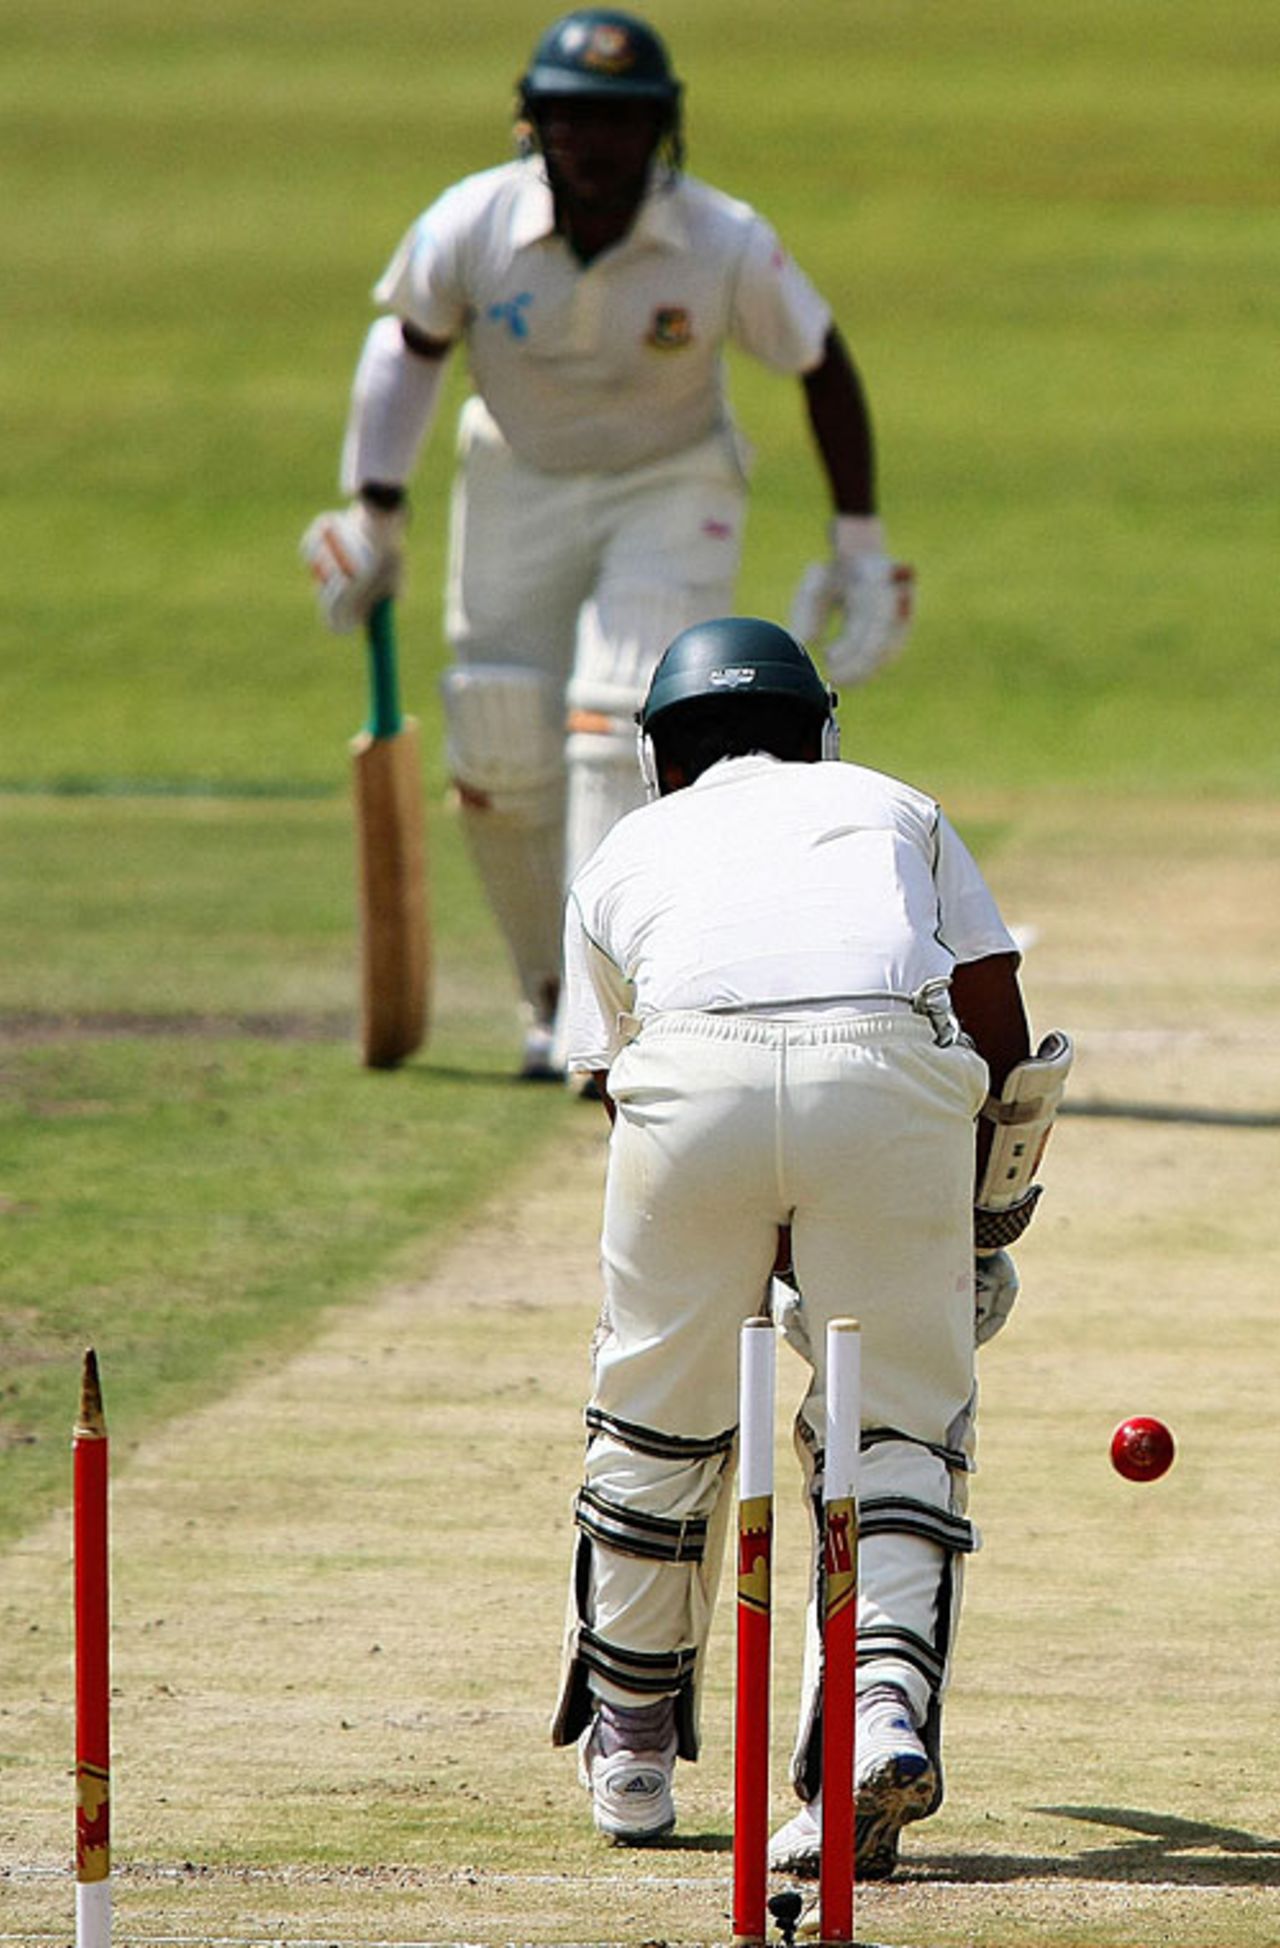 Tamim Iqbal has his off stump knocked over by Dale Steyn, South Africa v Bangladesh, 1st Test, Bloemfontein, November 20, 2008